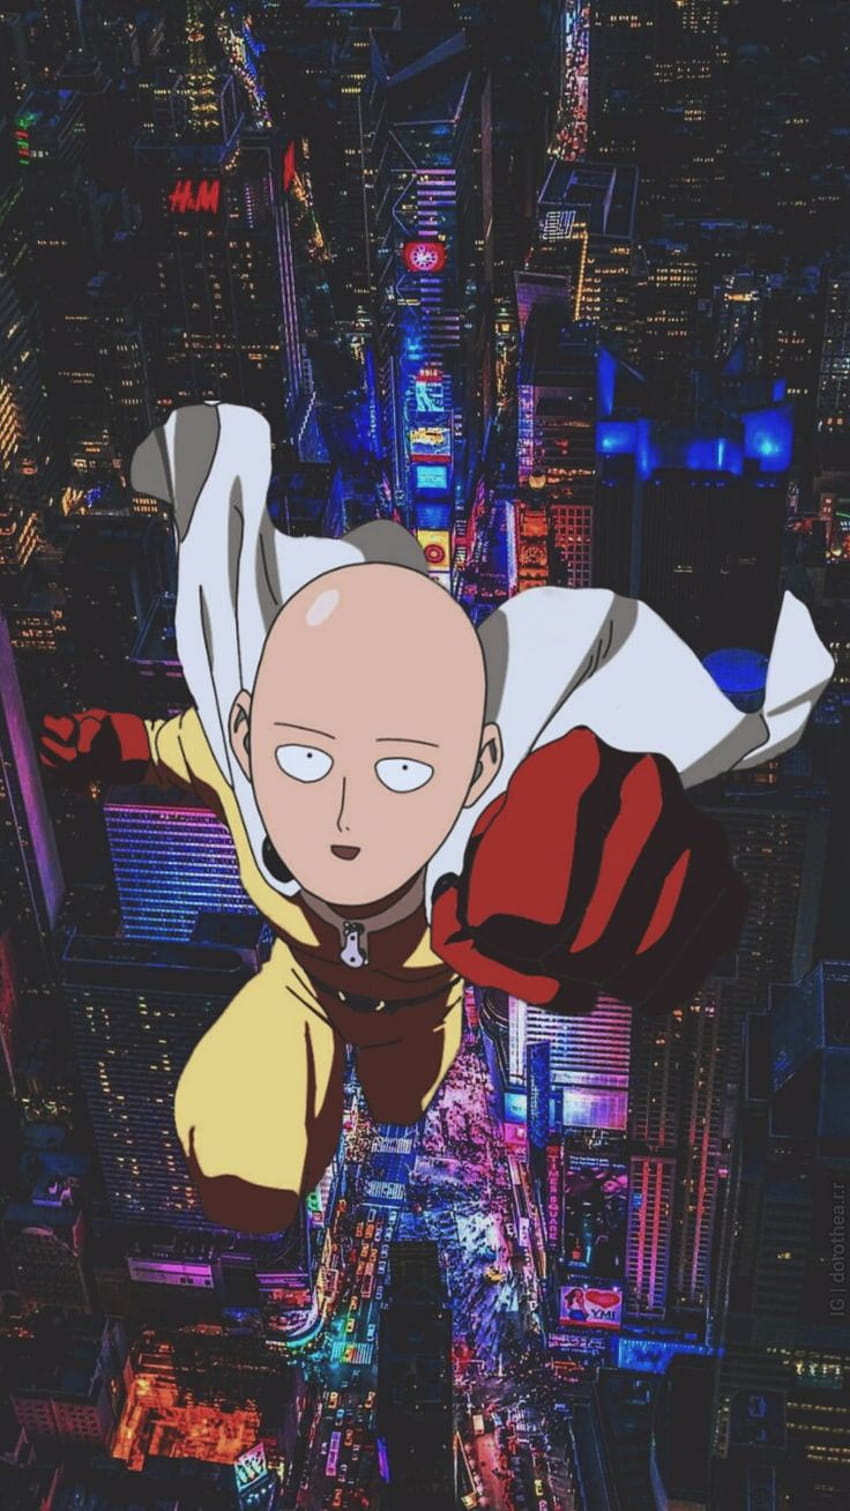 14 anime characters who can defeat the mighty Saitama - Dexerto